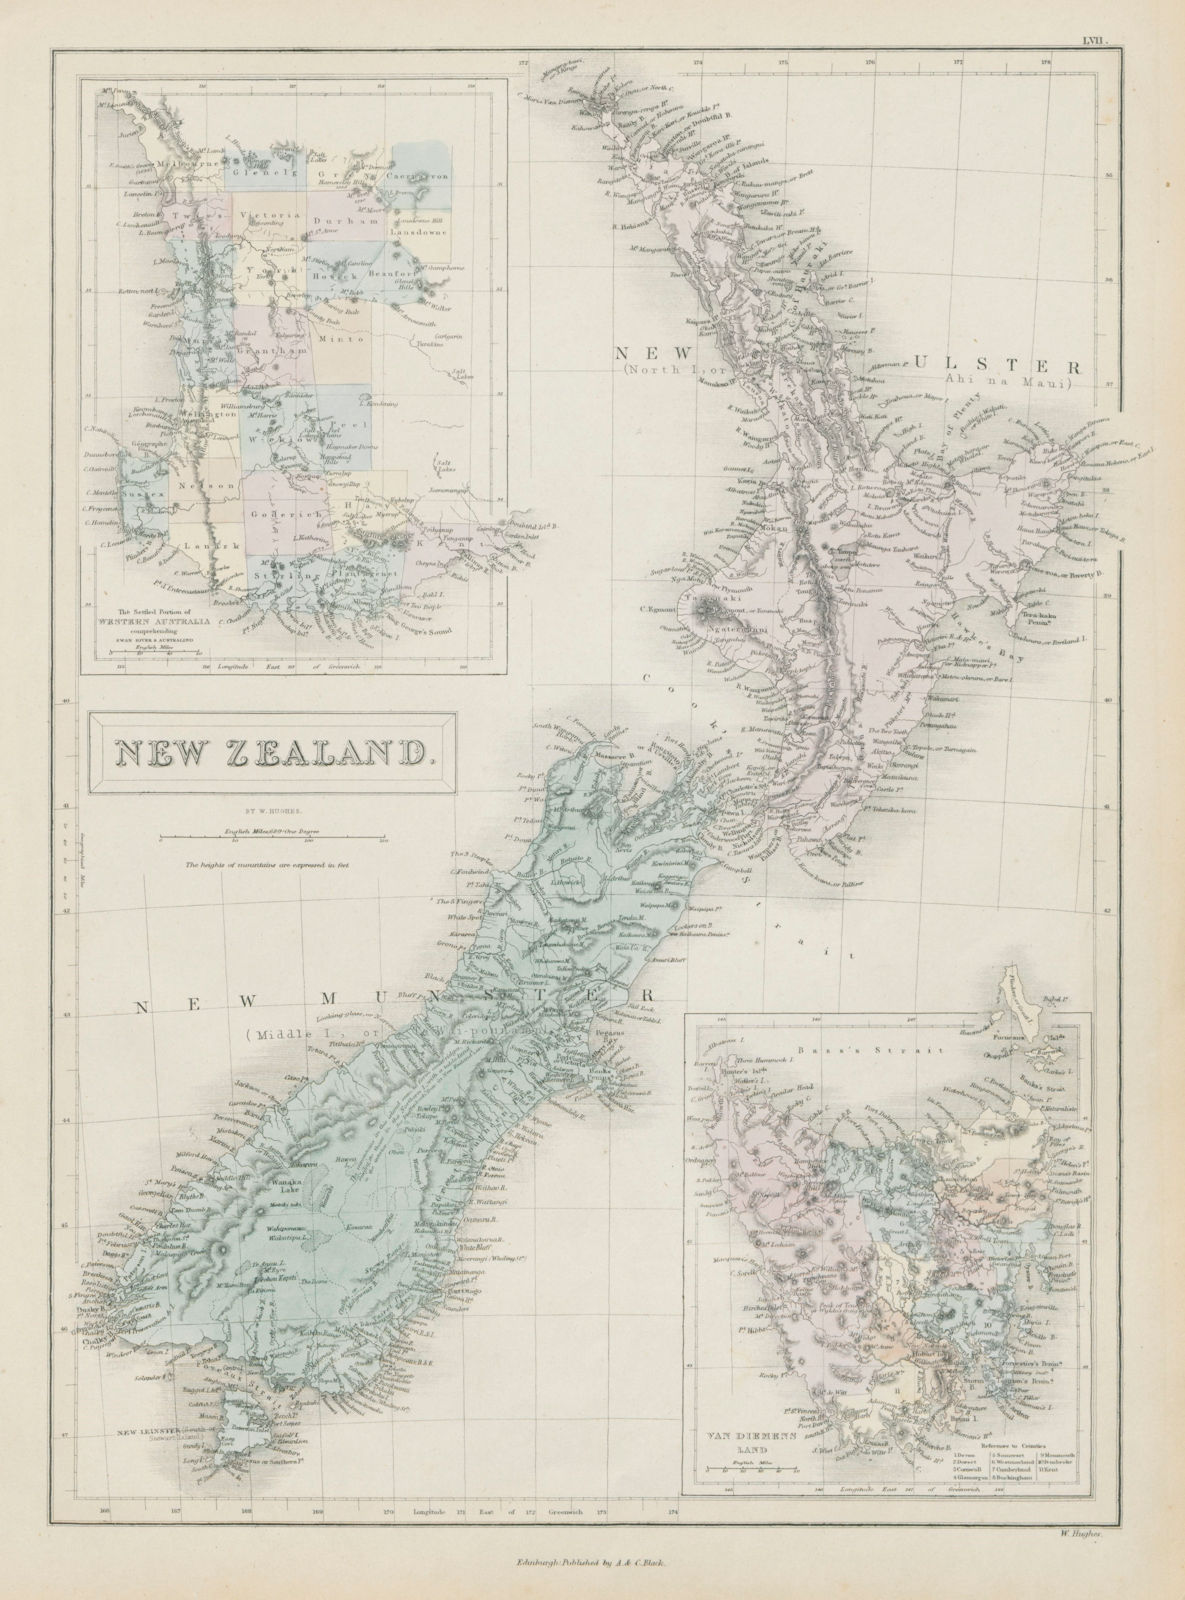 New Zealand "New Ulster" & "New Munster" (North & South I). HUGHES 1856 map